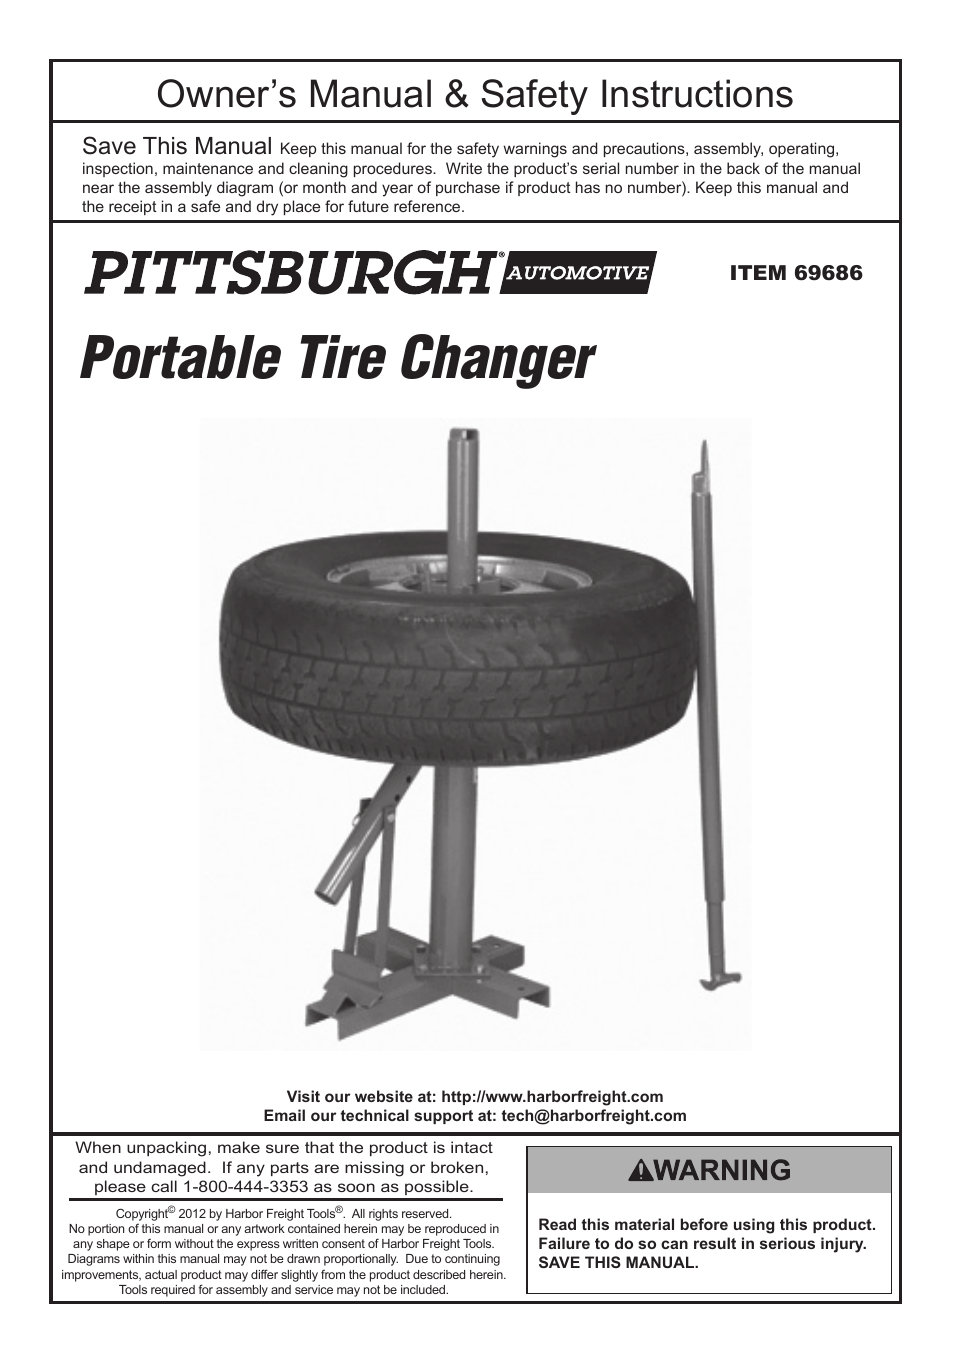 Harbor Freight Tools Pittsburgh Automotive Portable Tire Changer 69686